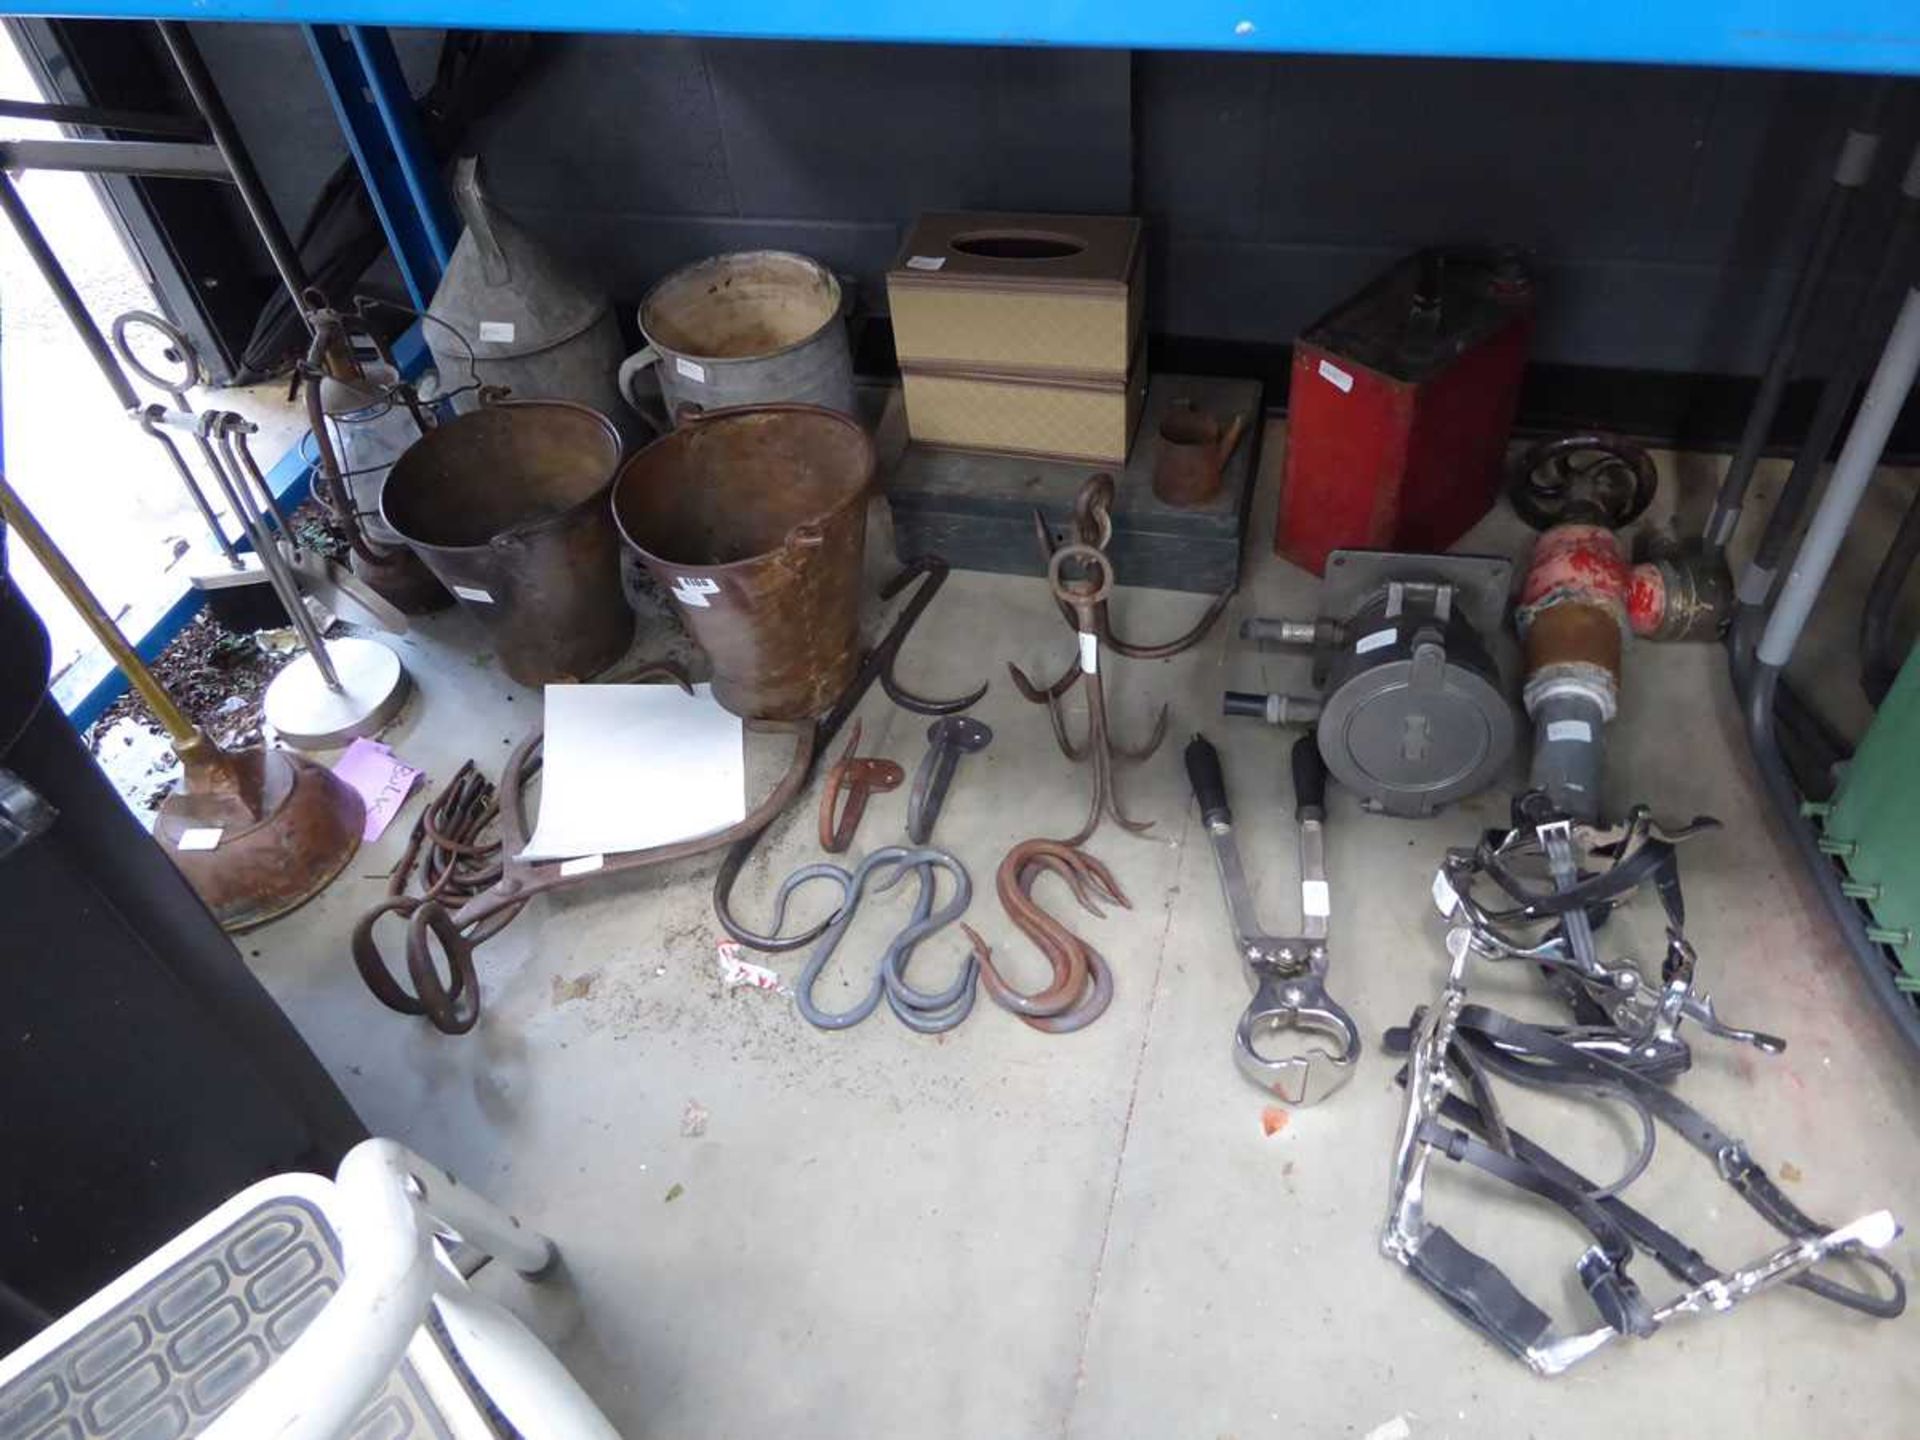 Quarter underbay containing items to inc. vintage can, horse bits, galvanised buckets, lamps, hooks,